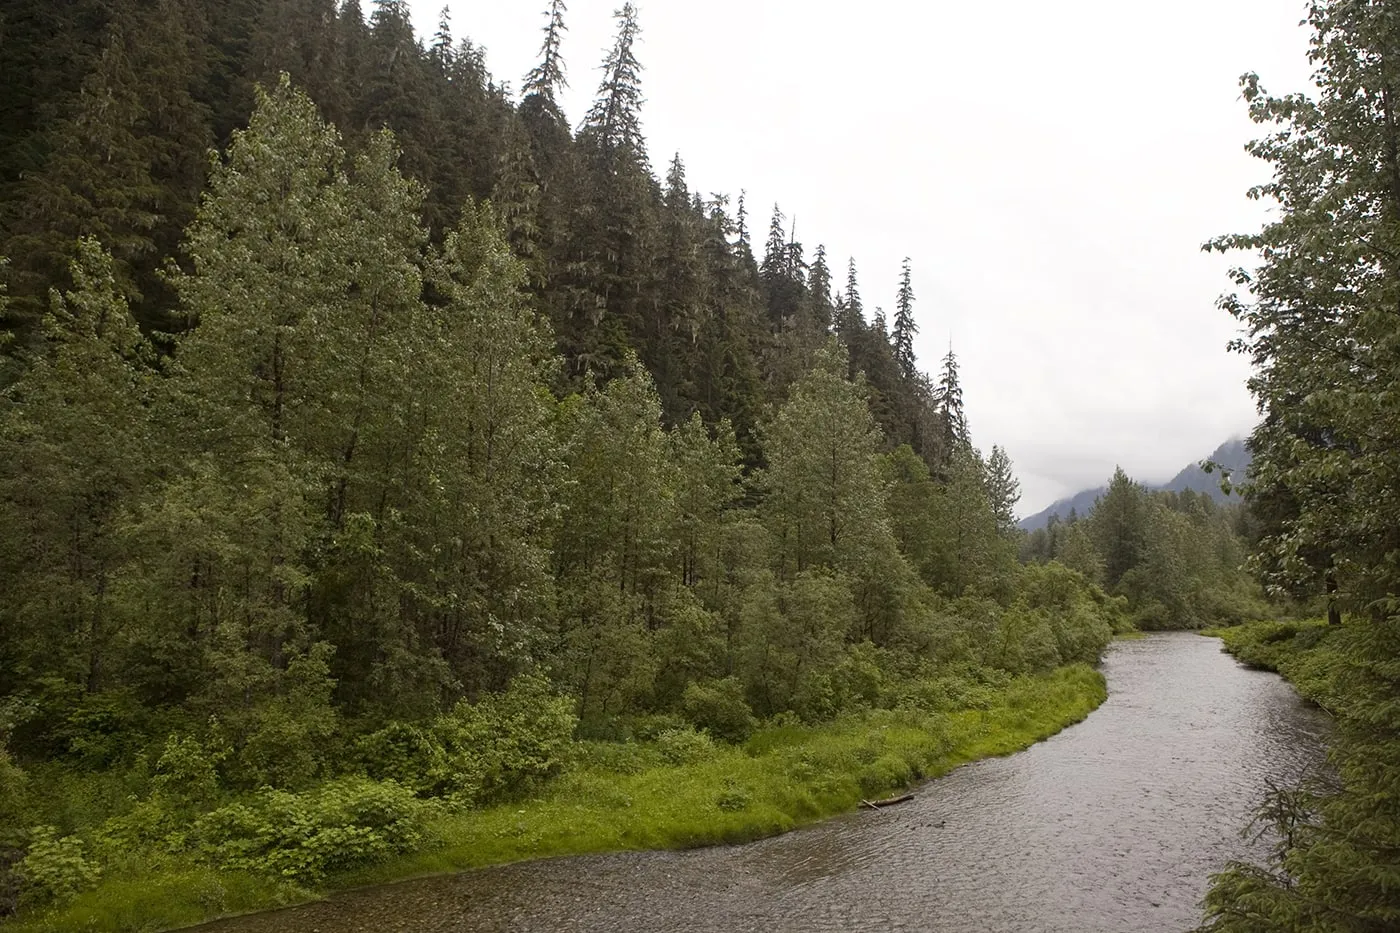 Fish Creek Wildlife Observation Site at the Tongass National Forest in Hyder, Alaska.